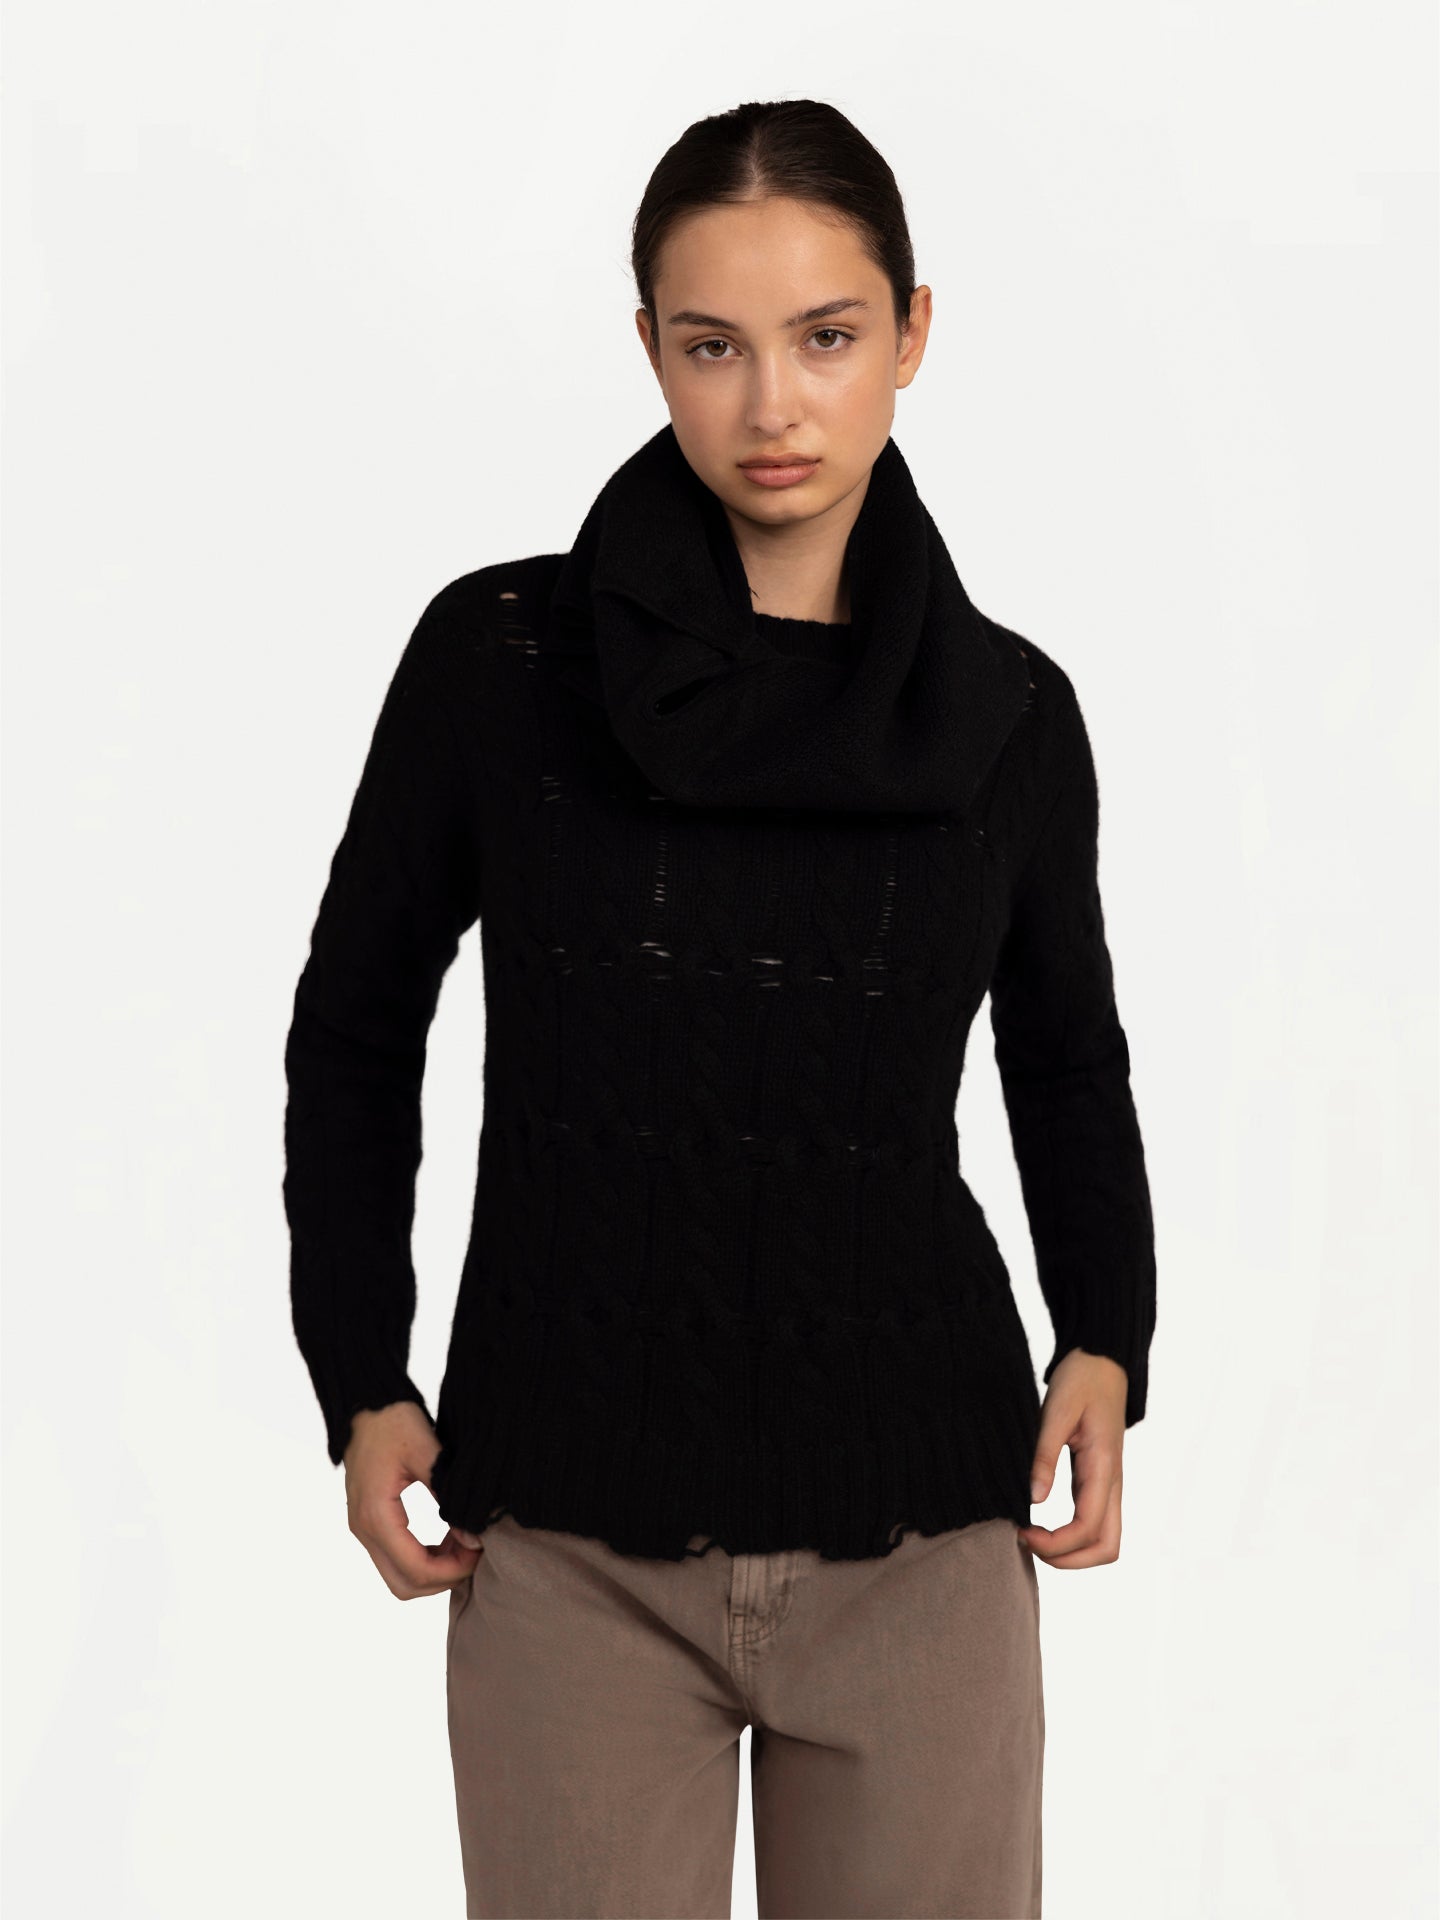 Unisex Cashmere Reversible Scarf With Buttons Black - Gobi Cashmere